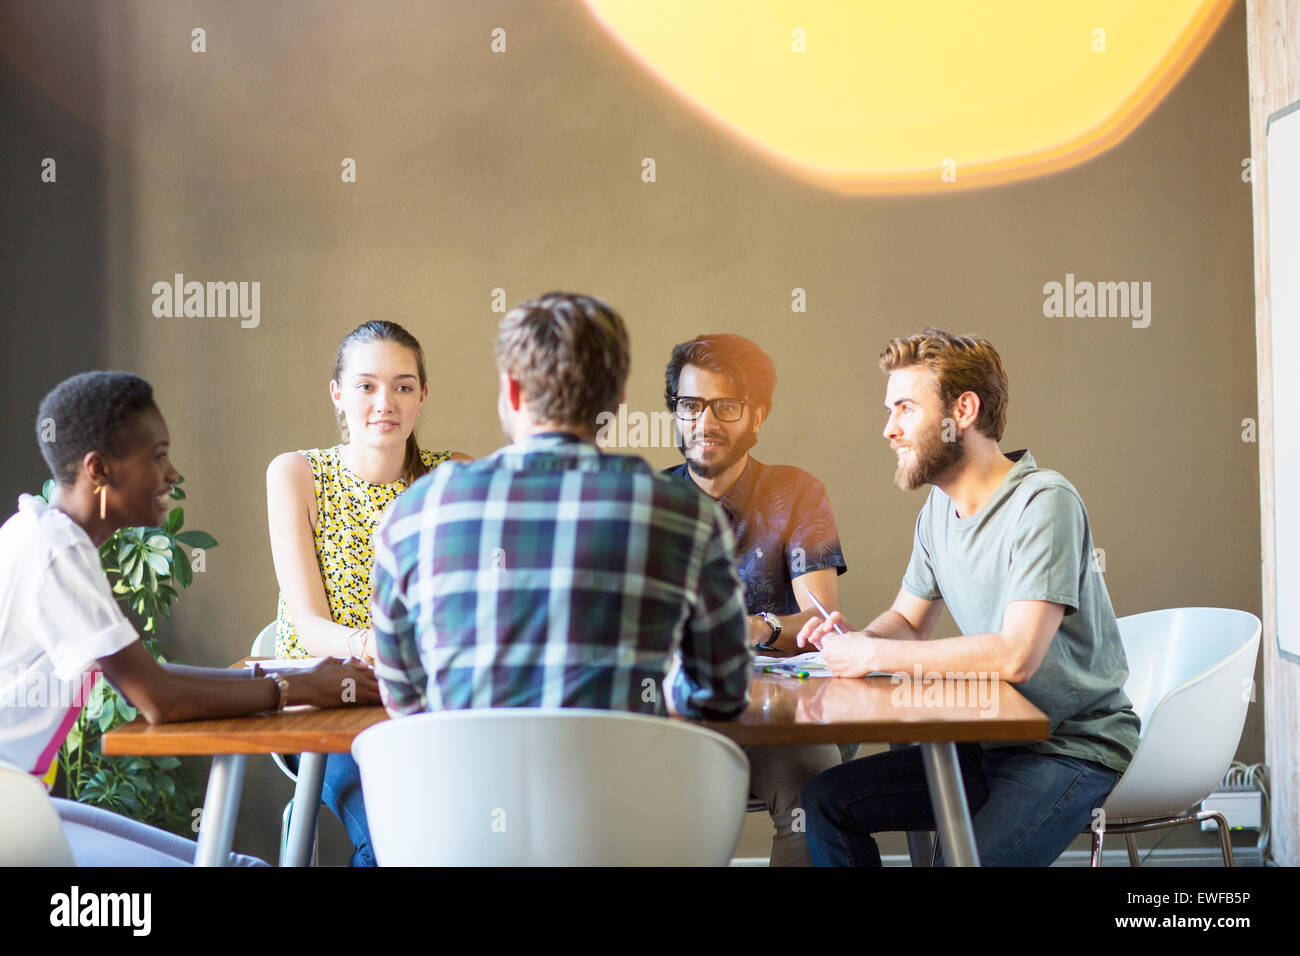 Casual business people meeting at table in office Stock Photo